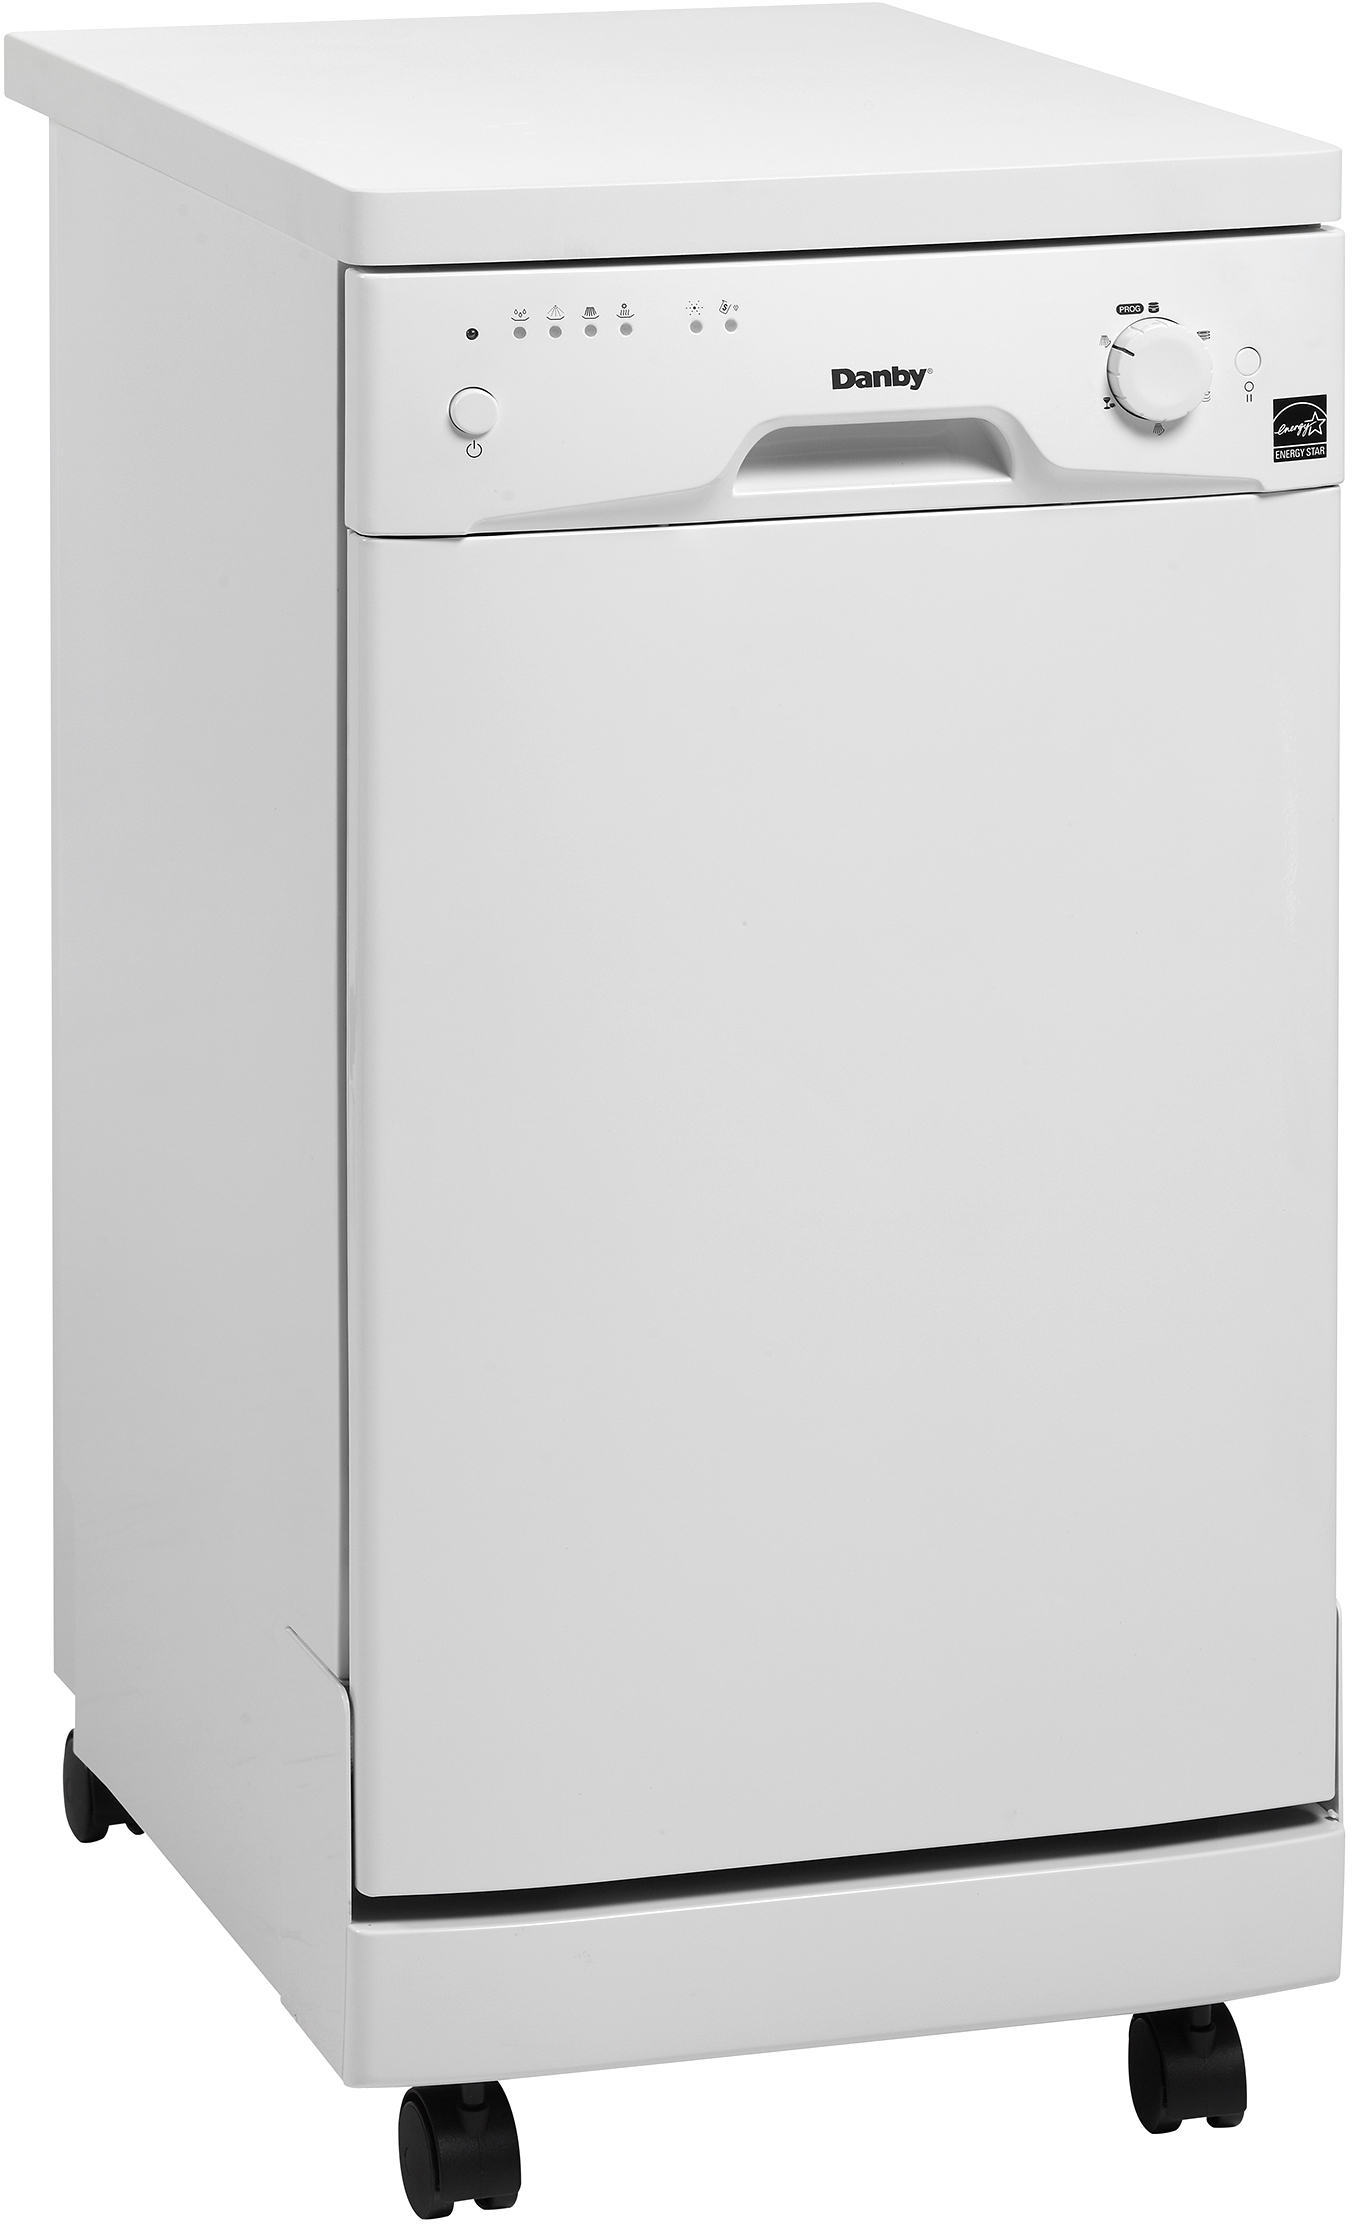 Danby 18" Portable Dishwasher in White - image 3 of 4